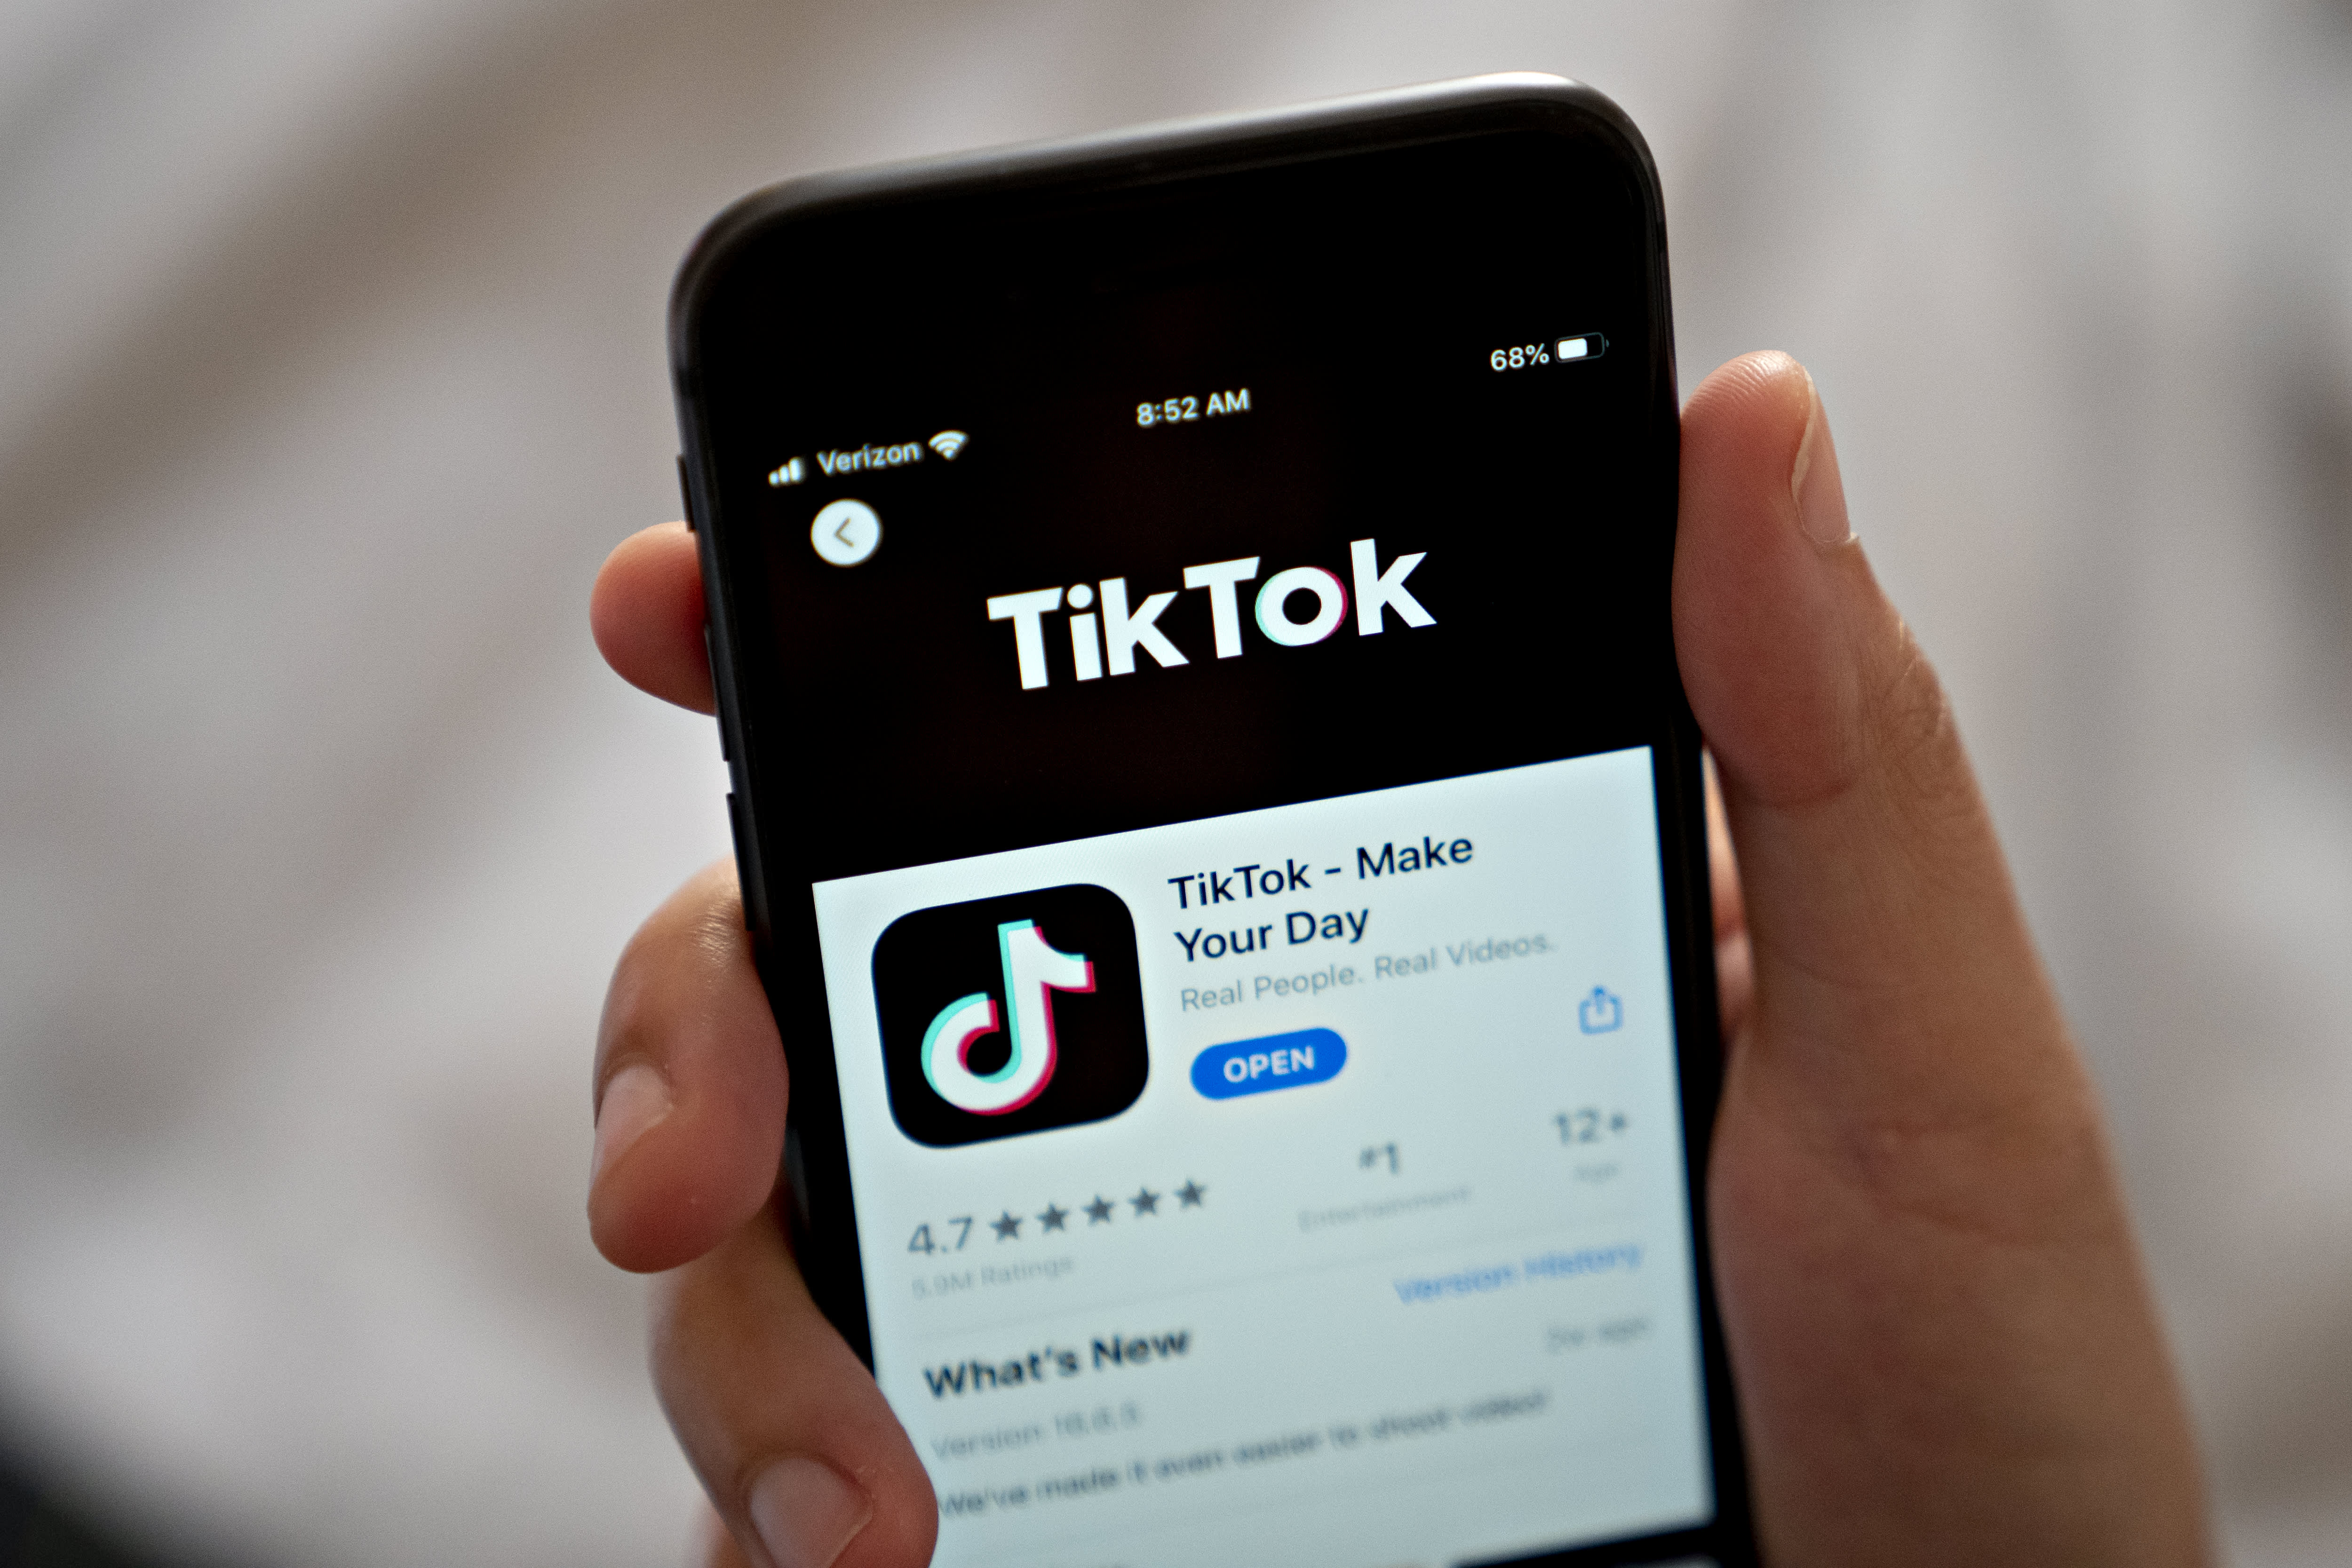 TikTok safety update allows parents to control their kids’ accounts